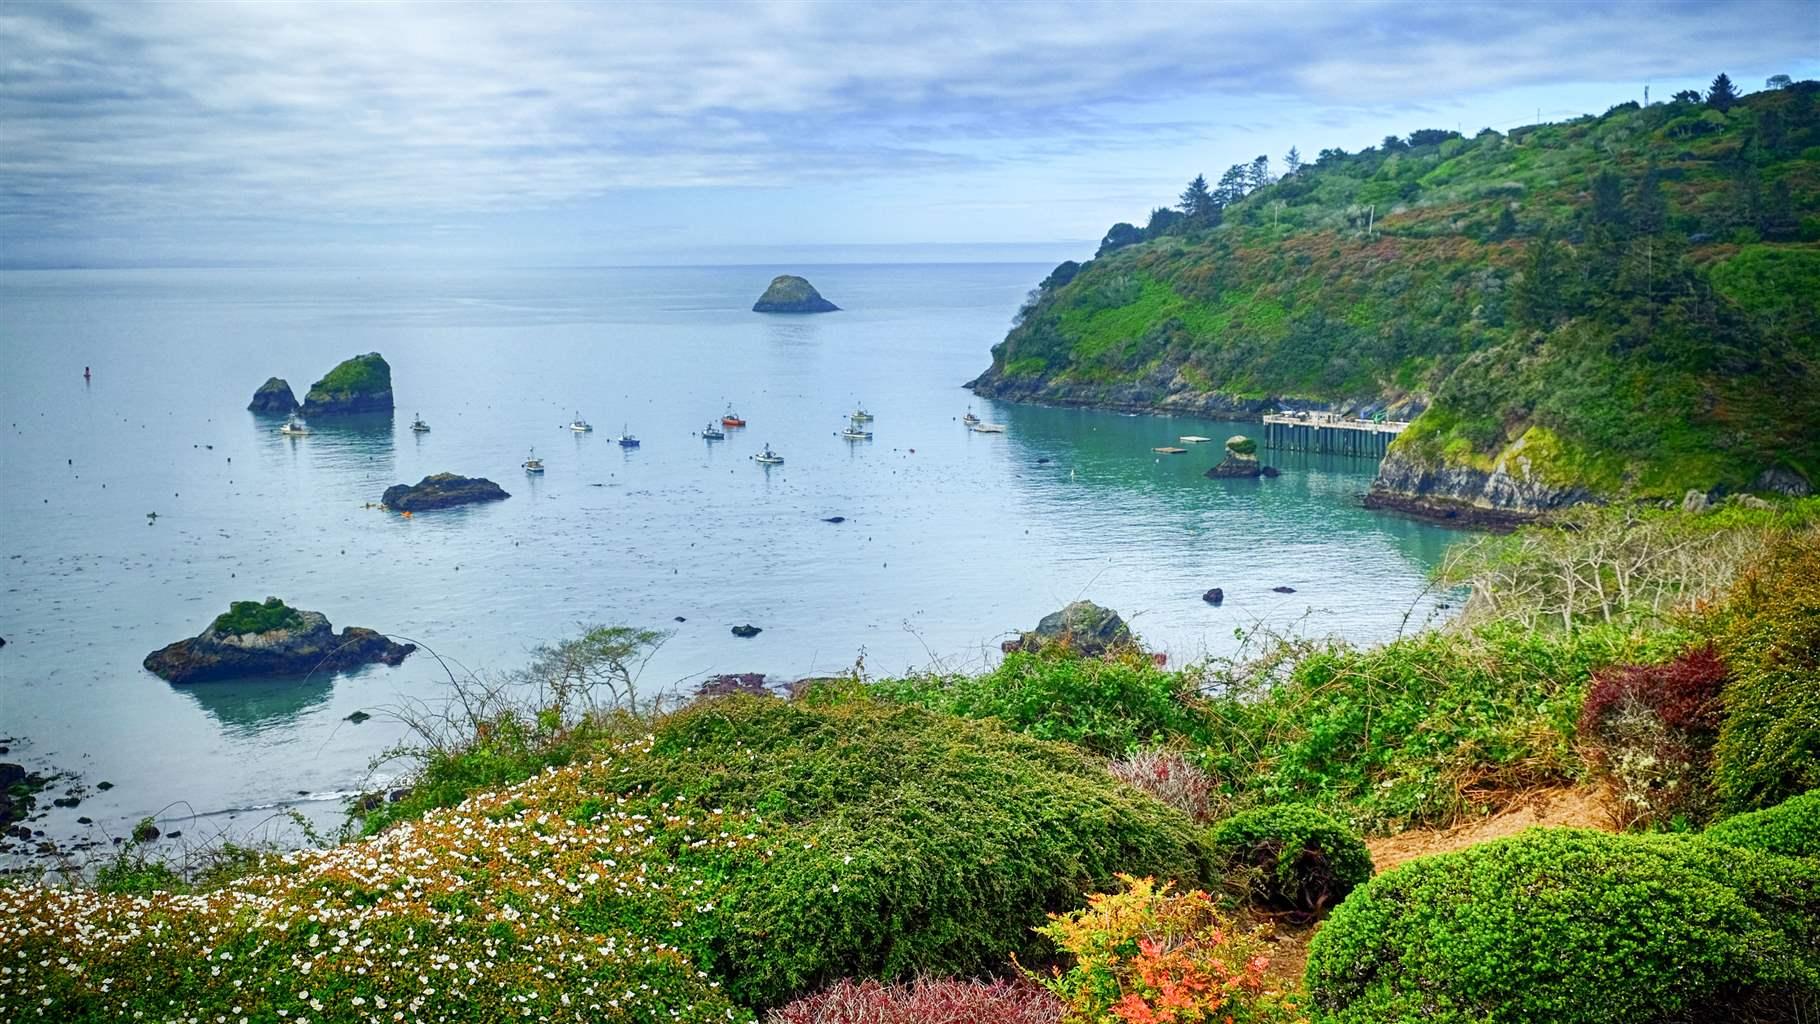 Rugged hills covered in verdant vegetation—including some colorful flowering bushes—rise from glassy, dark blue ocean waters. A handful of rock formations jut from the water just offshore, with around a dozen small fishing boats between those rocks and the shoreline. 